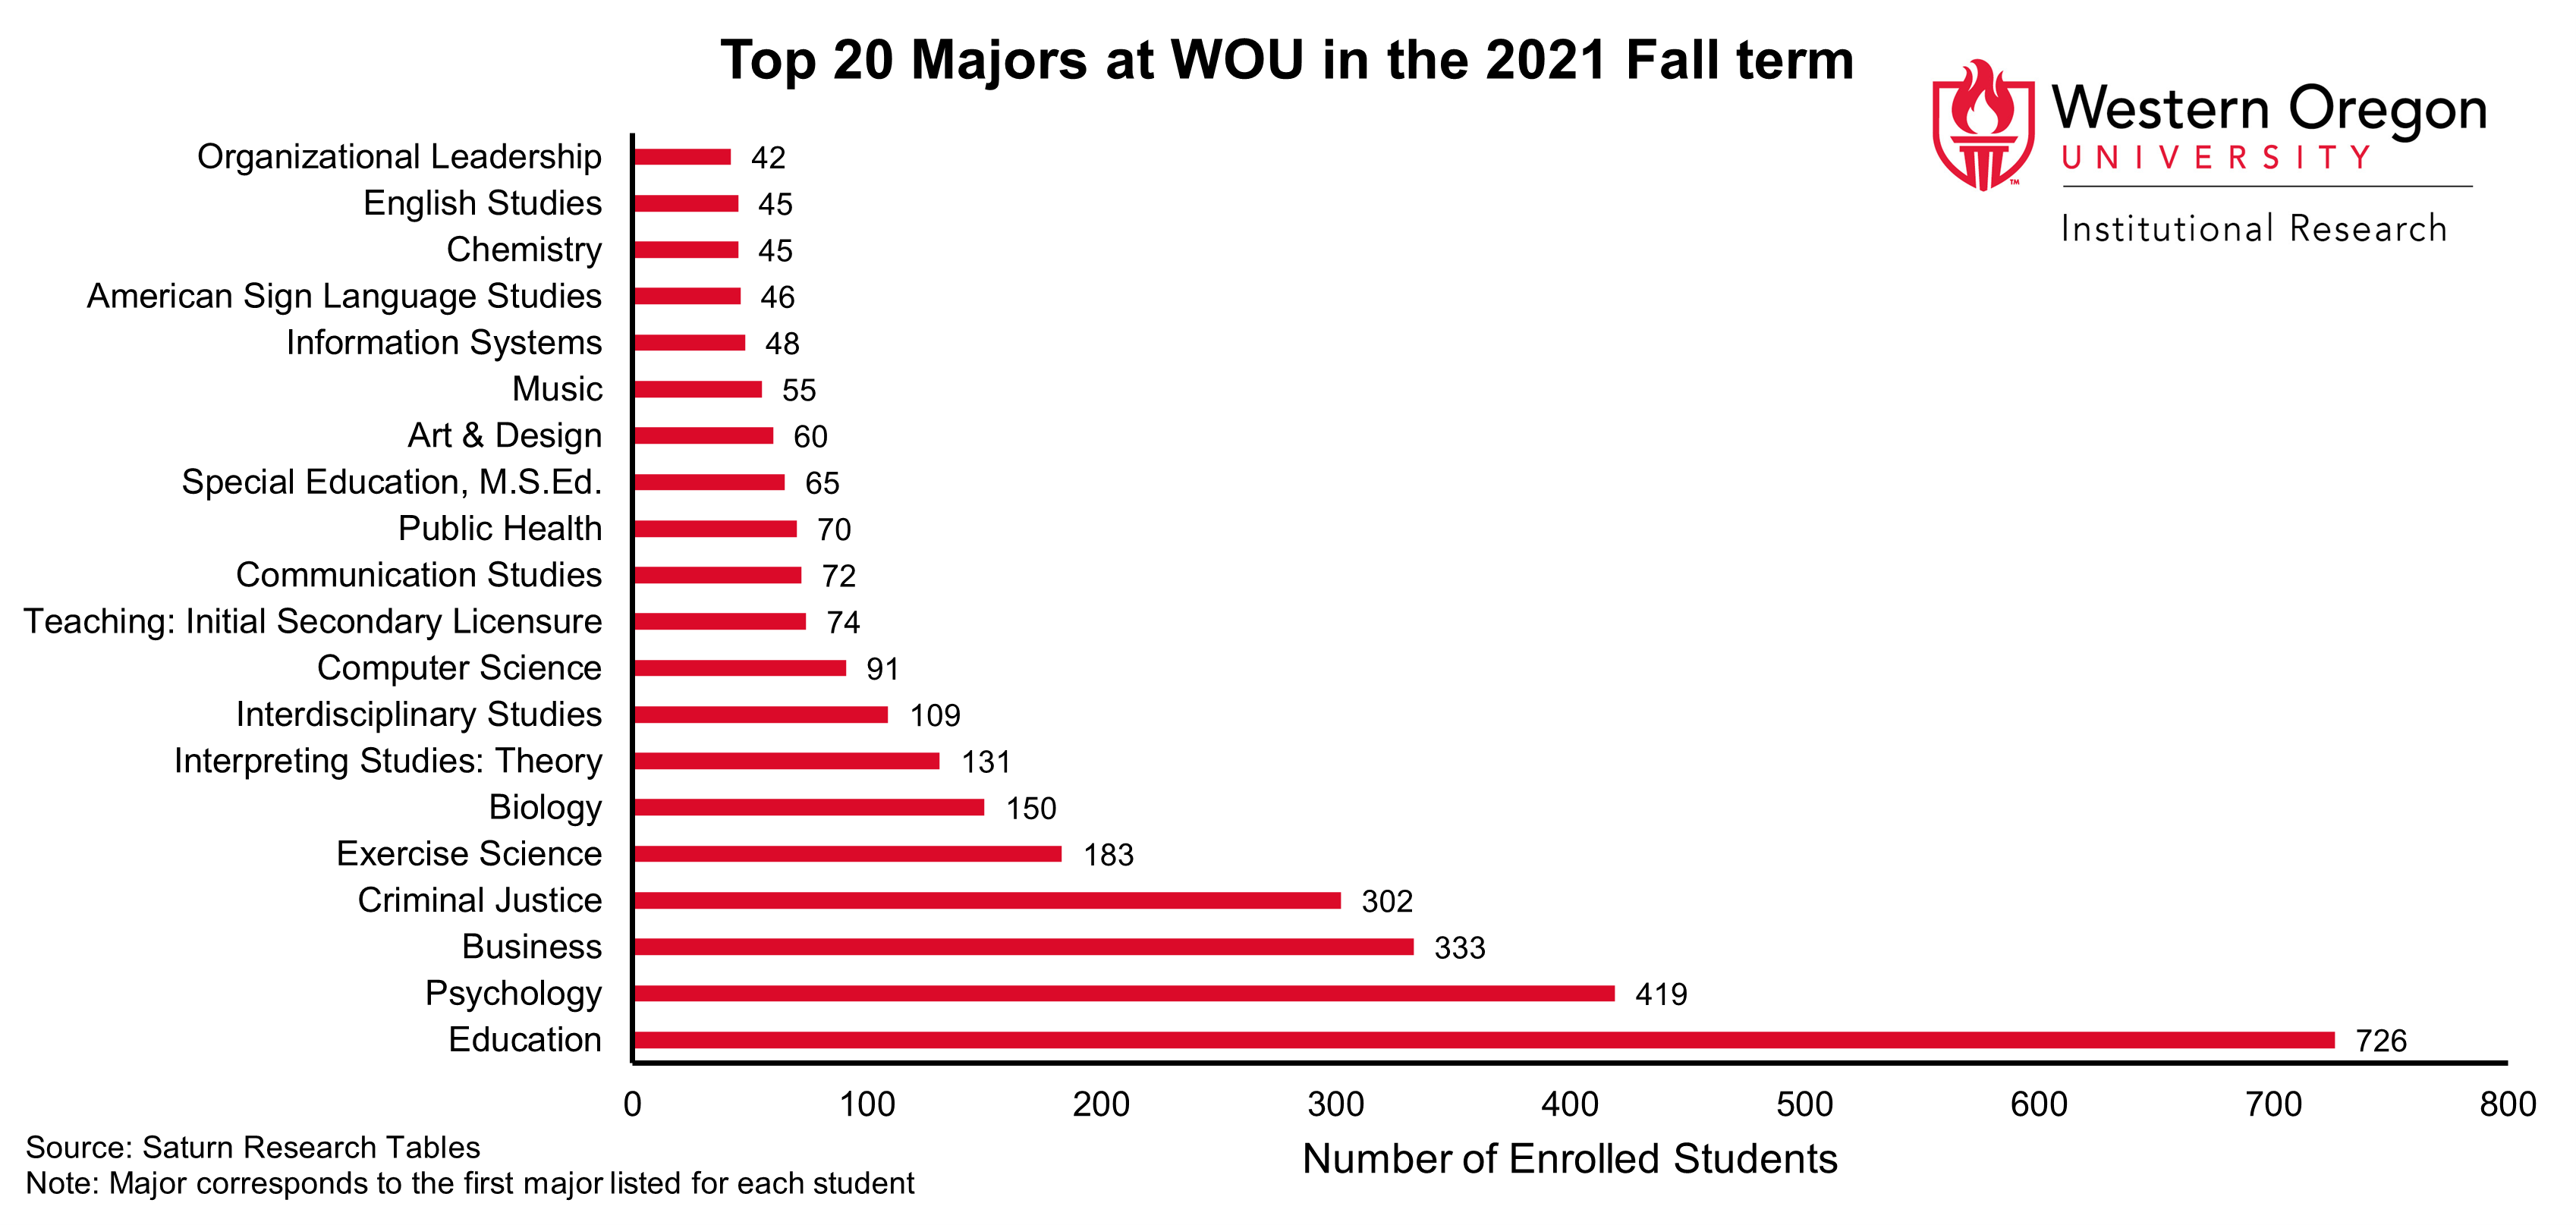 Bar graph of the top 20 majors at WOU in Fall 2021, showing that Education, Psychology and Business are the majors with the largest number of students enrolled